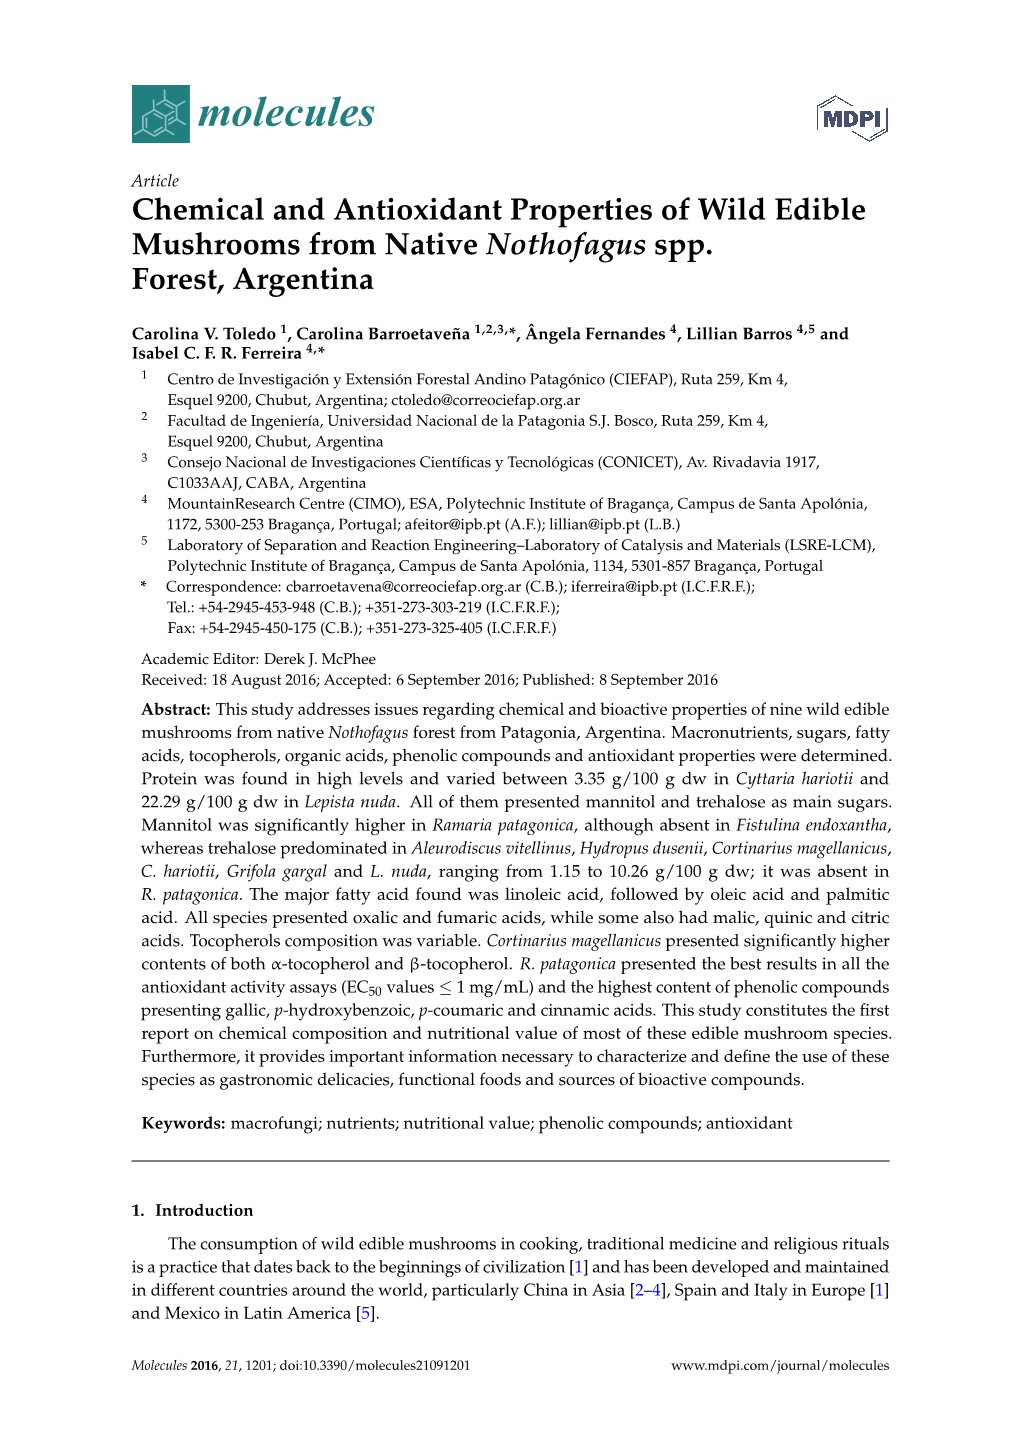 Chemical and Antioxidant Properties of Wild Edible Mushrooms from Native Nothofagus Spp